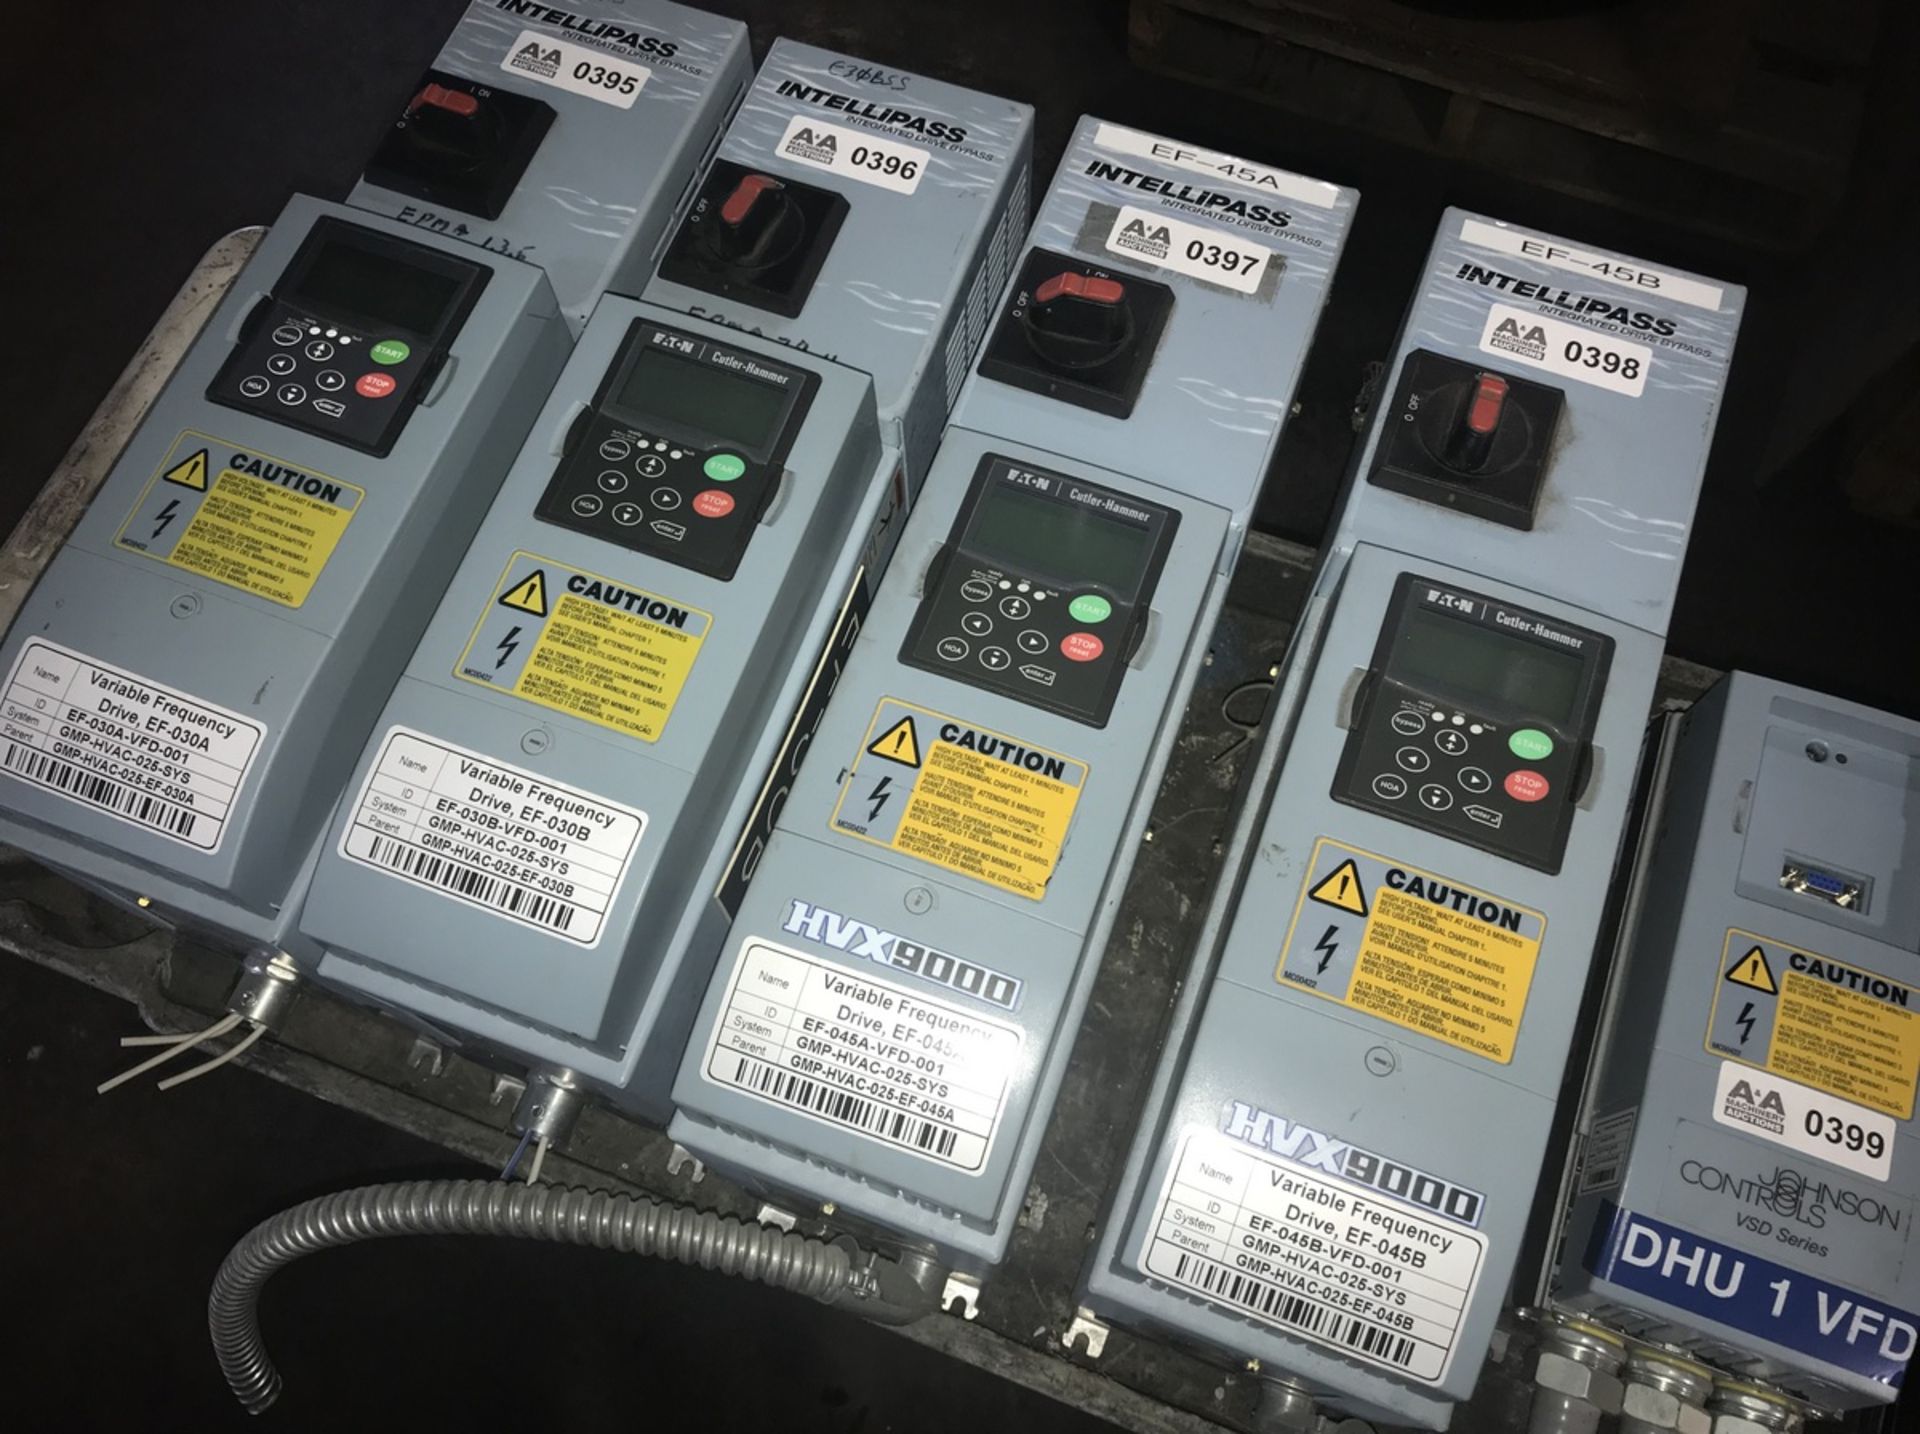 Eaton / Cutler-Hammer Intellipass HVX 9000 Variable Frequency Drive - Image 2 of 2